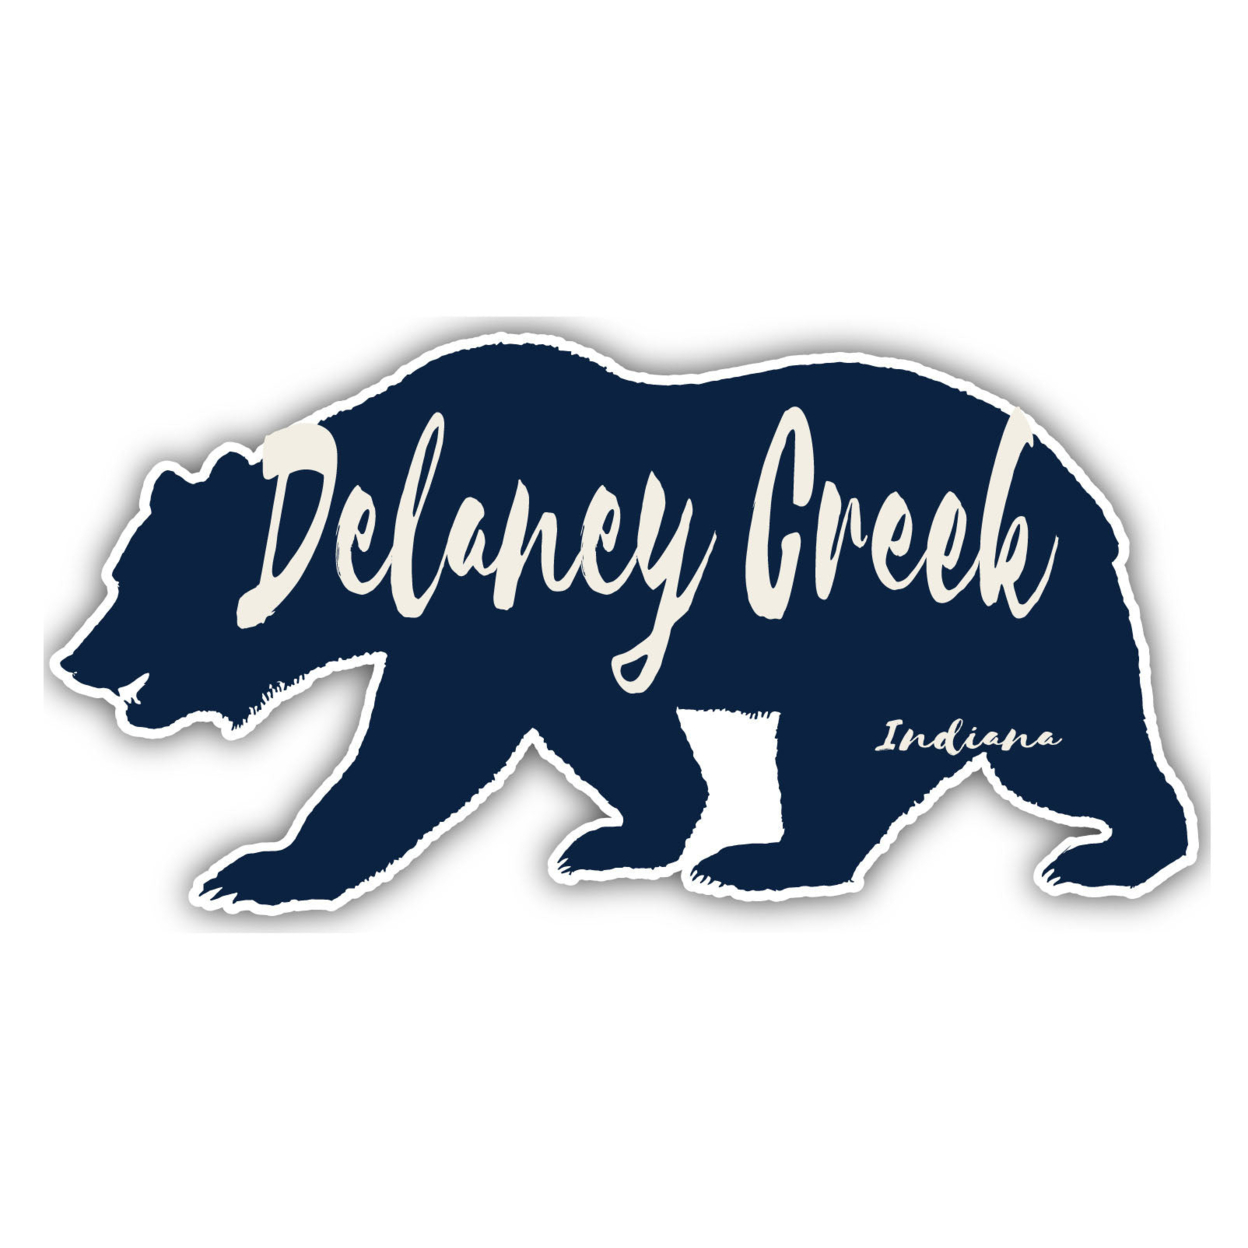 Delaney Creek Indiana Souvenir Decorative Stickers (Choose Theme And Size) - 4-Pack, 8-Inch, Bear